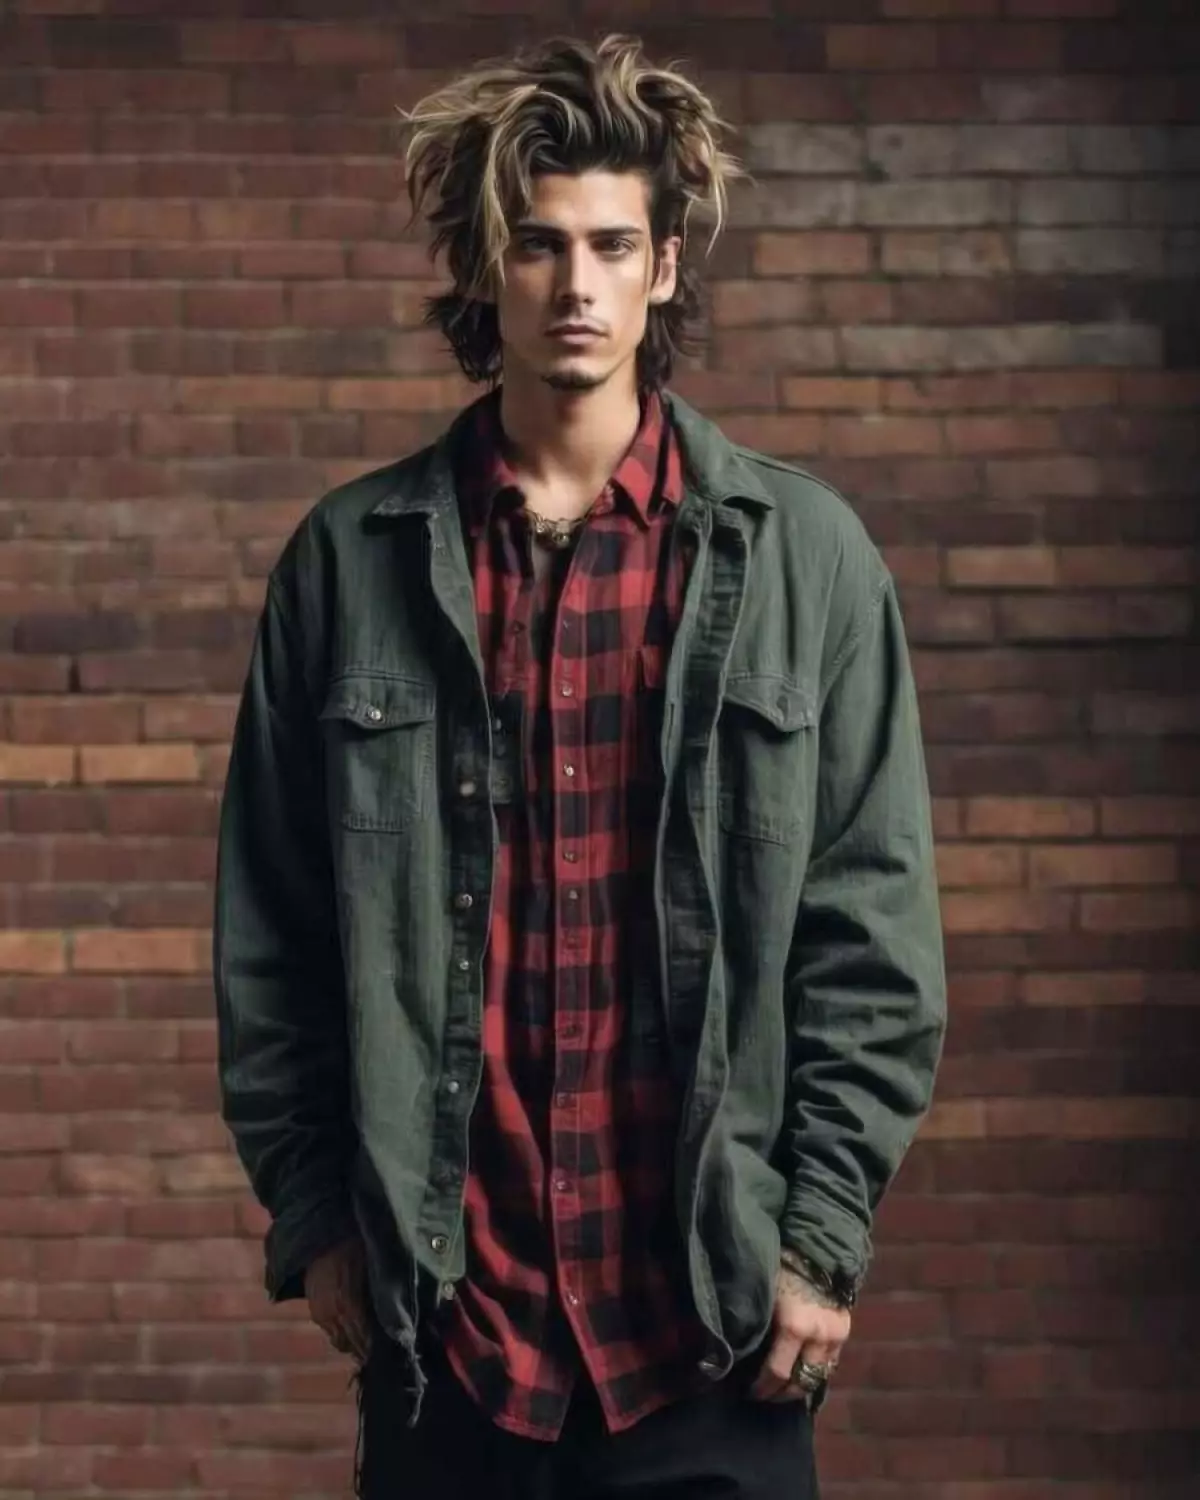 Man wearing a longline red/black grunge check shirt and green army surplus jacket with black ripped jeans